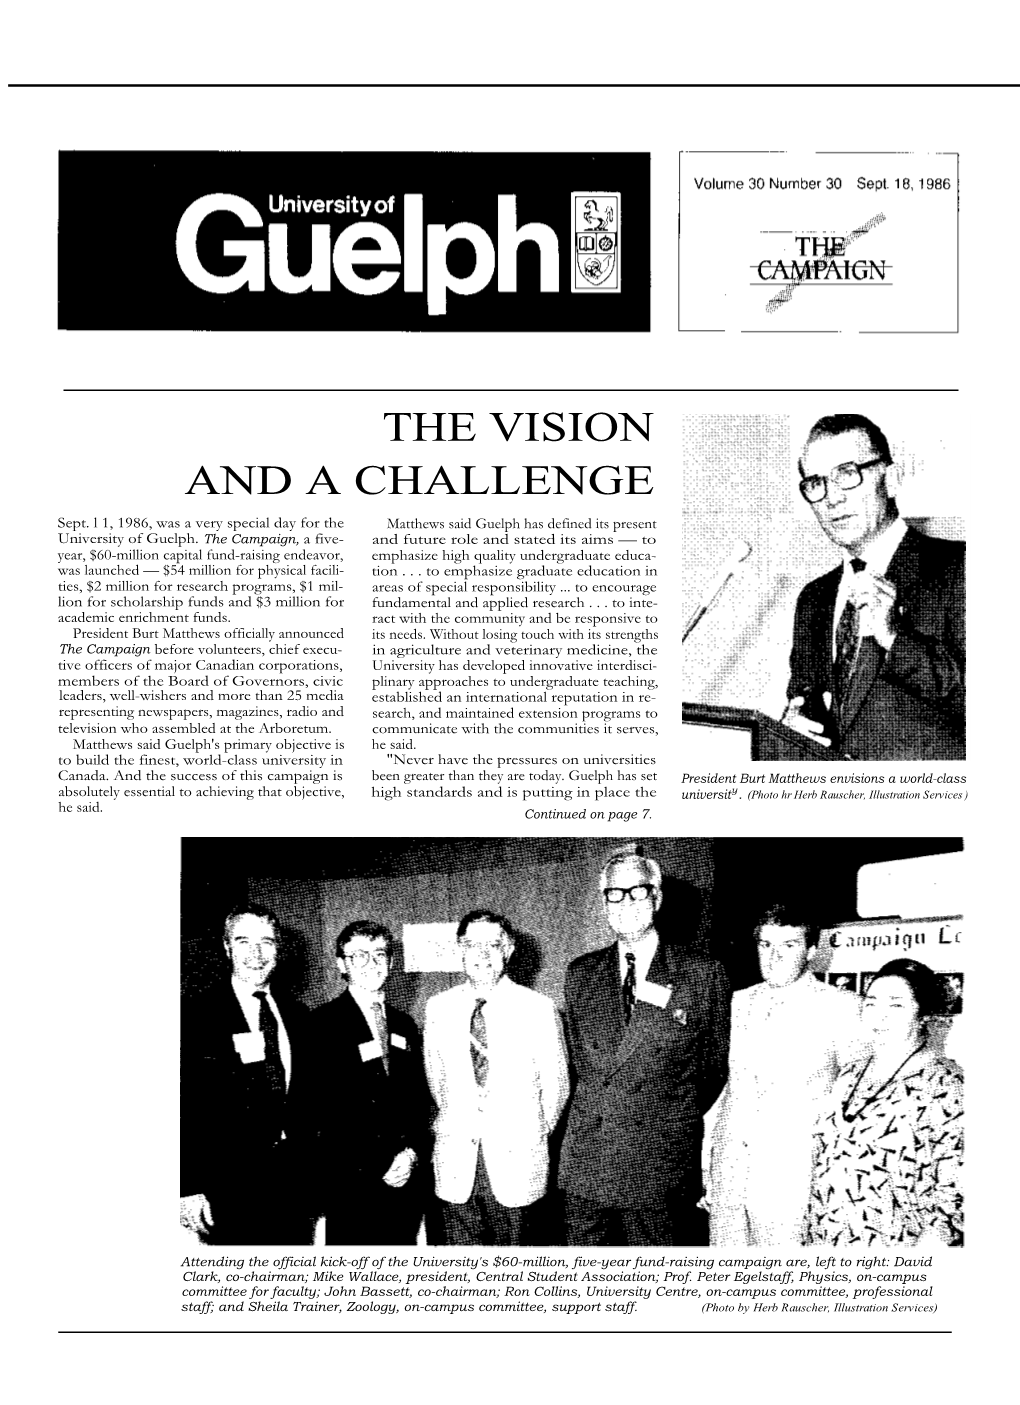 THE VISION and a CHALLENGE Sept